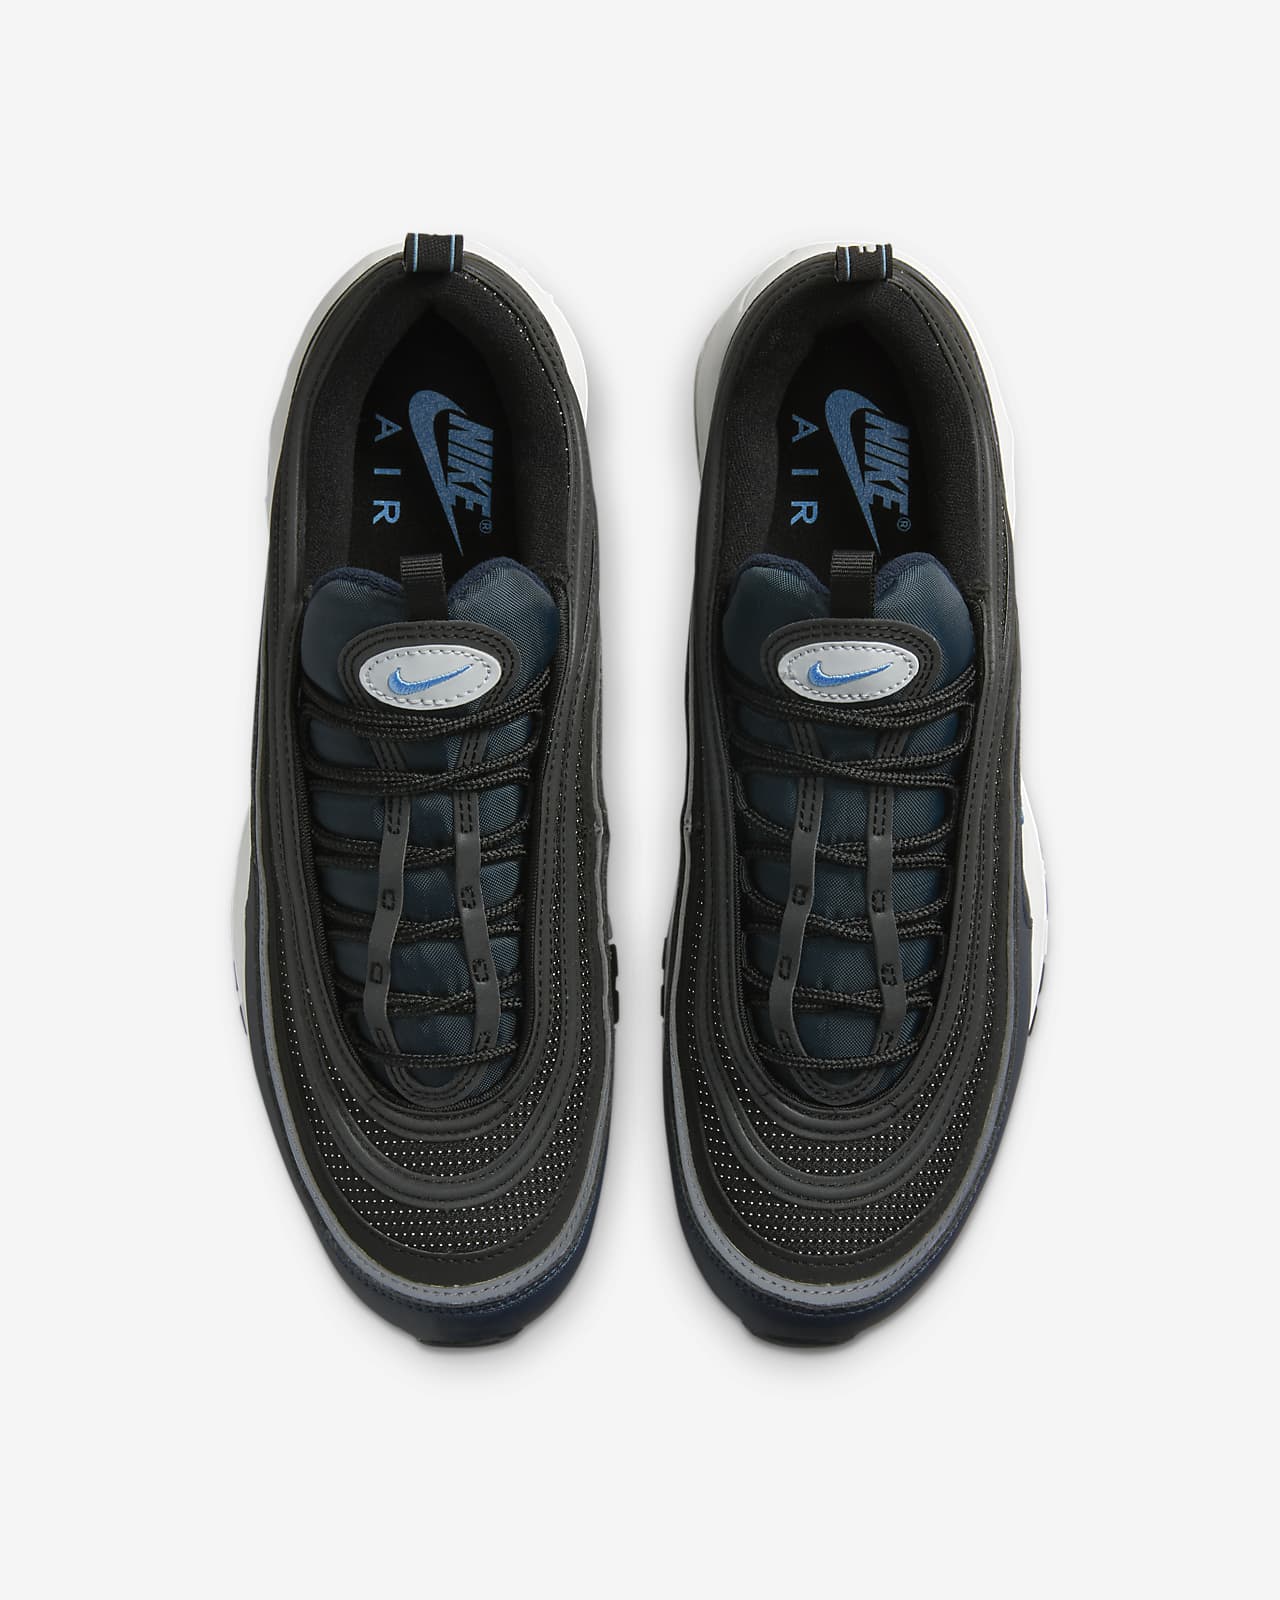 among Contain climate Nike Air Max 97 Men's Shoes. Nike.com